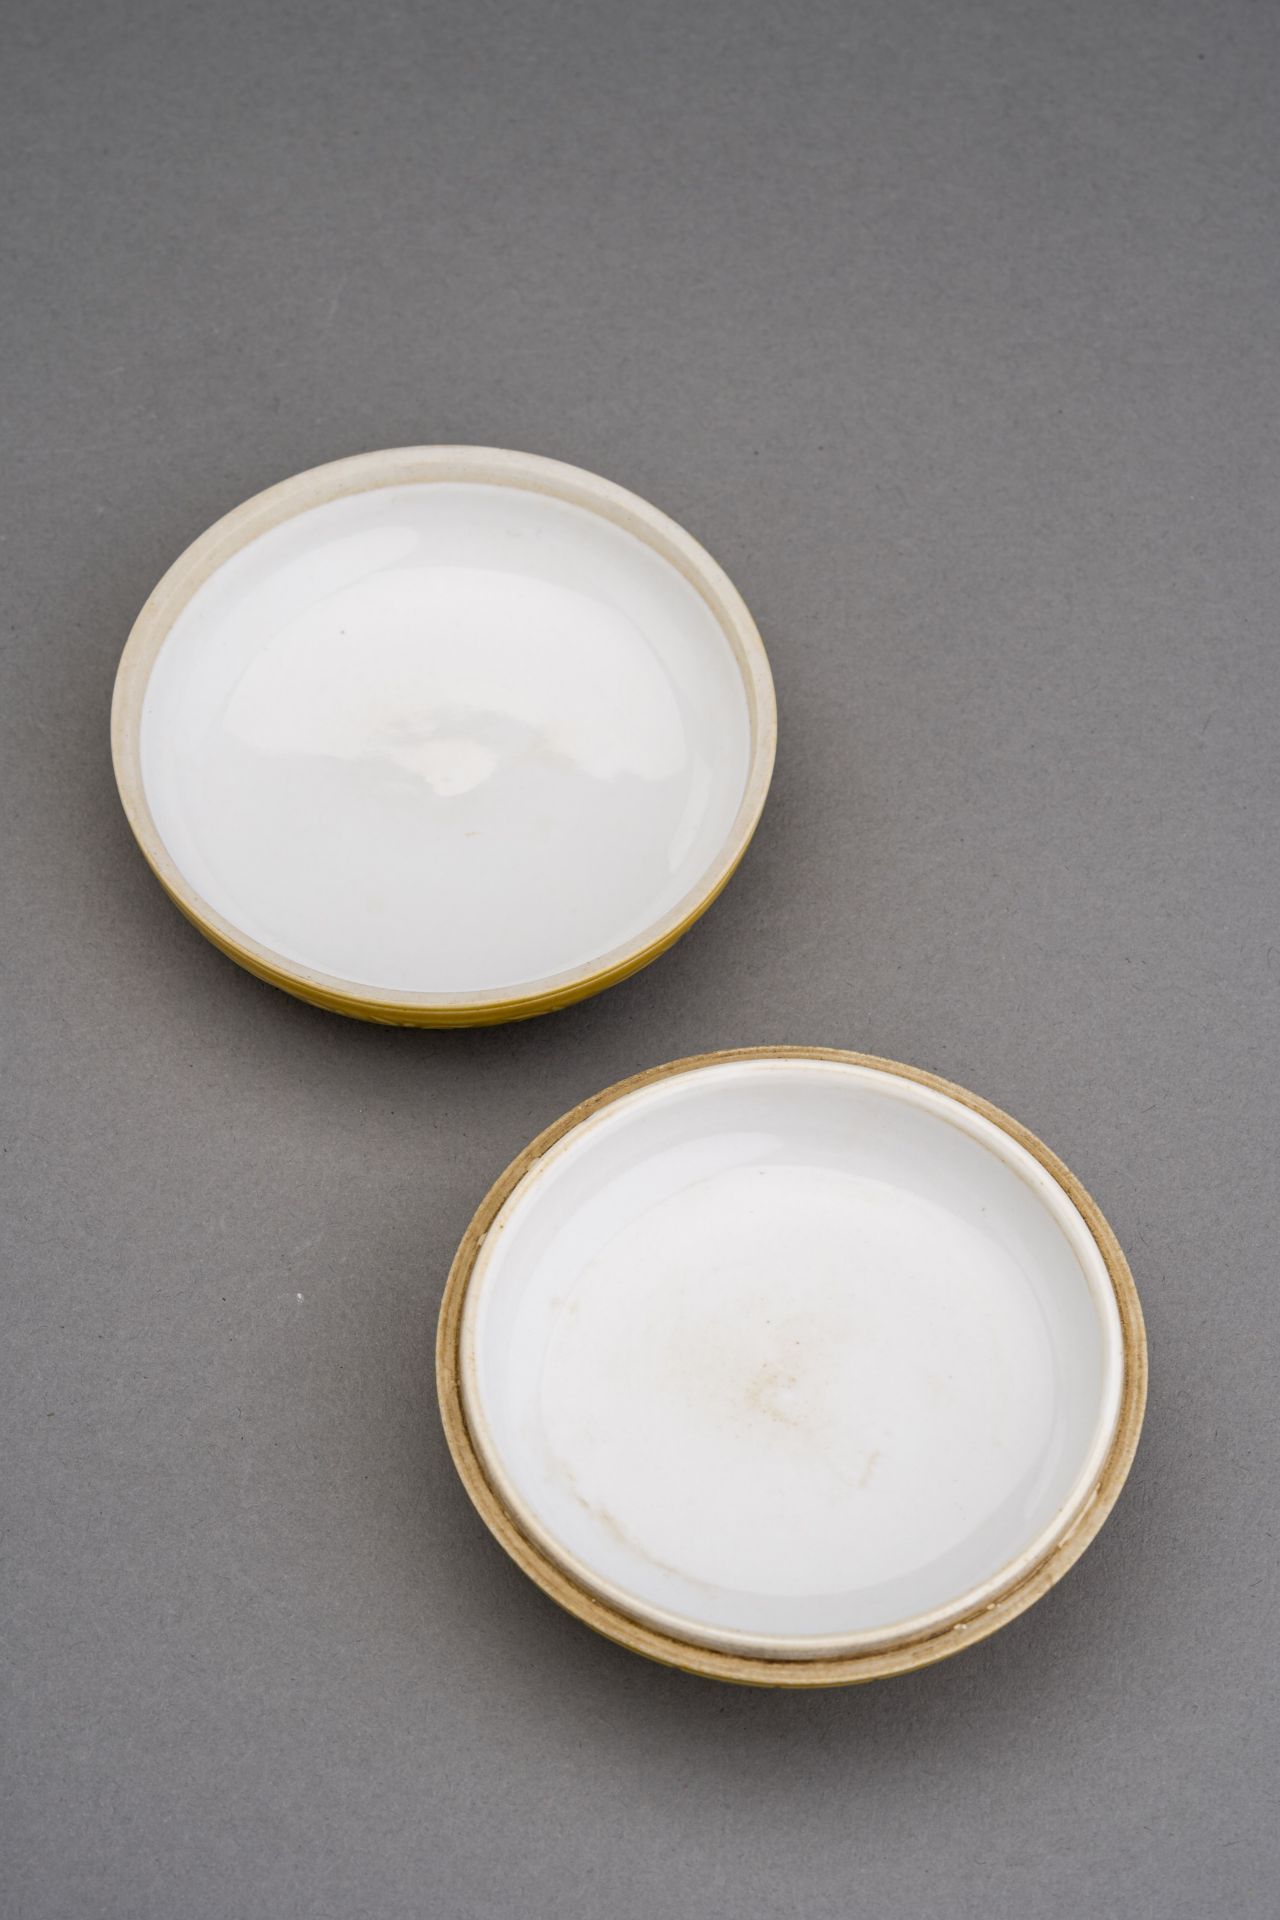 A YELLOW GLAZED PORCELAIN BOX AND COVER, c. 1920s - Image 7 of 9